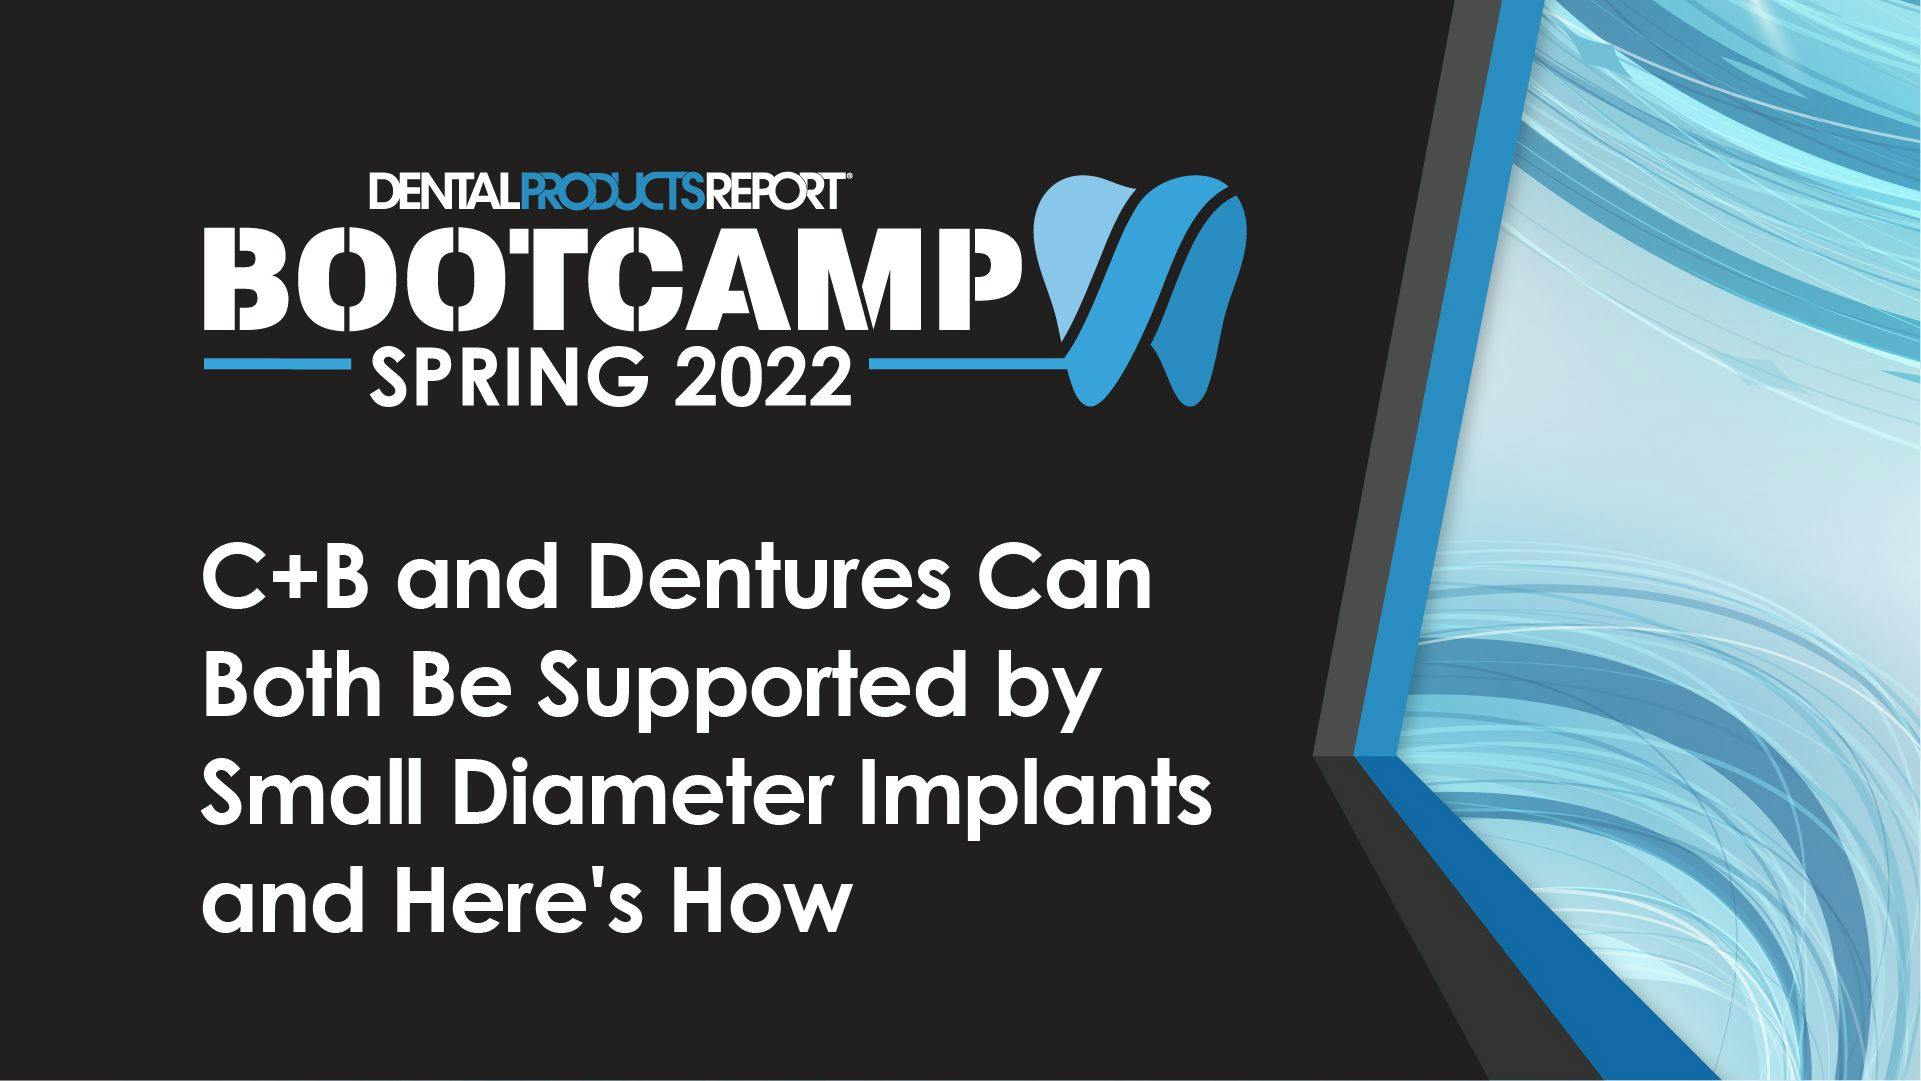 C+B and Dentures Can Both Be Supported by Small Diameter Implants and Here's How